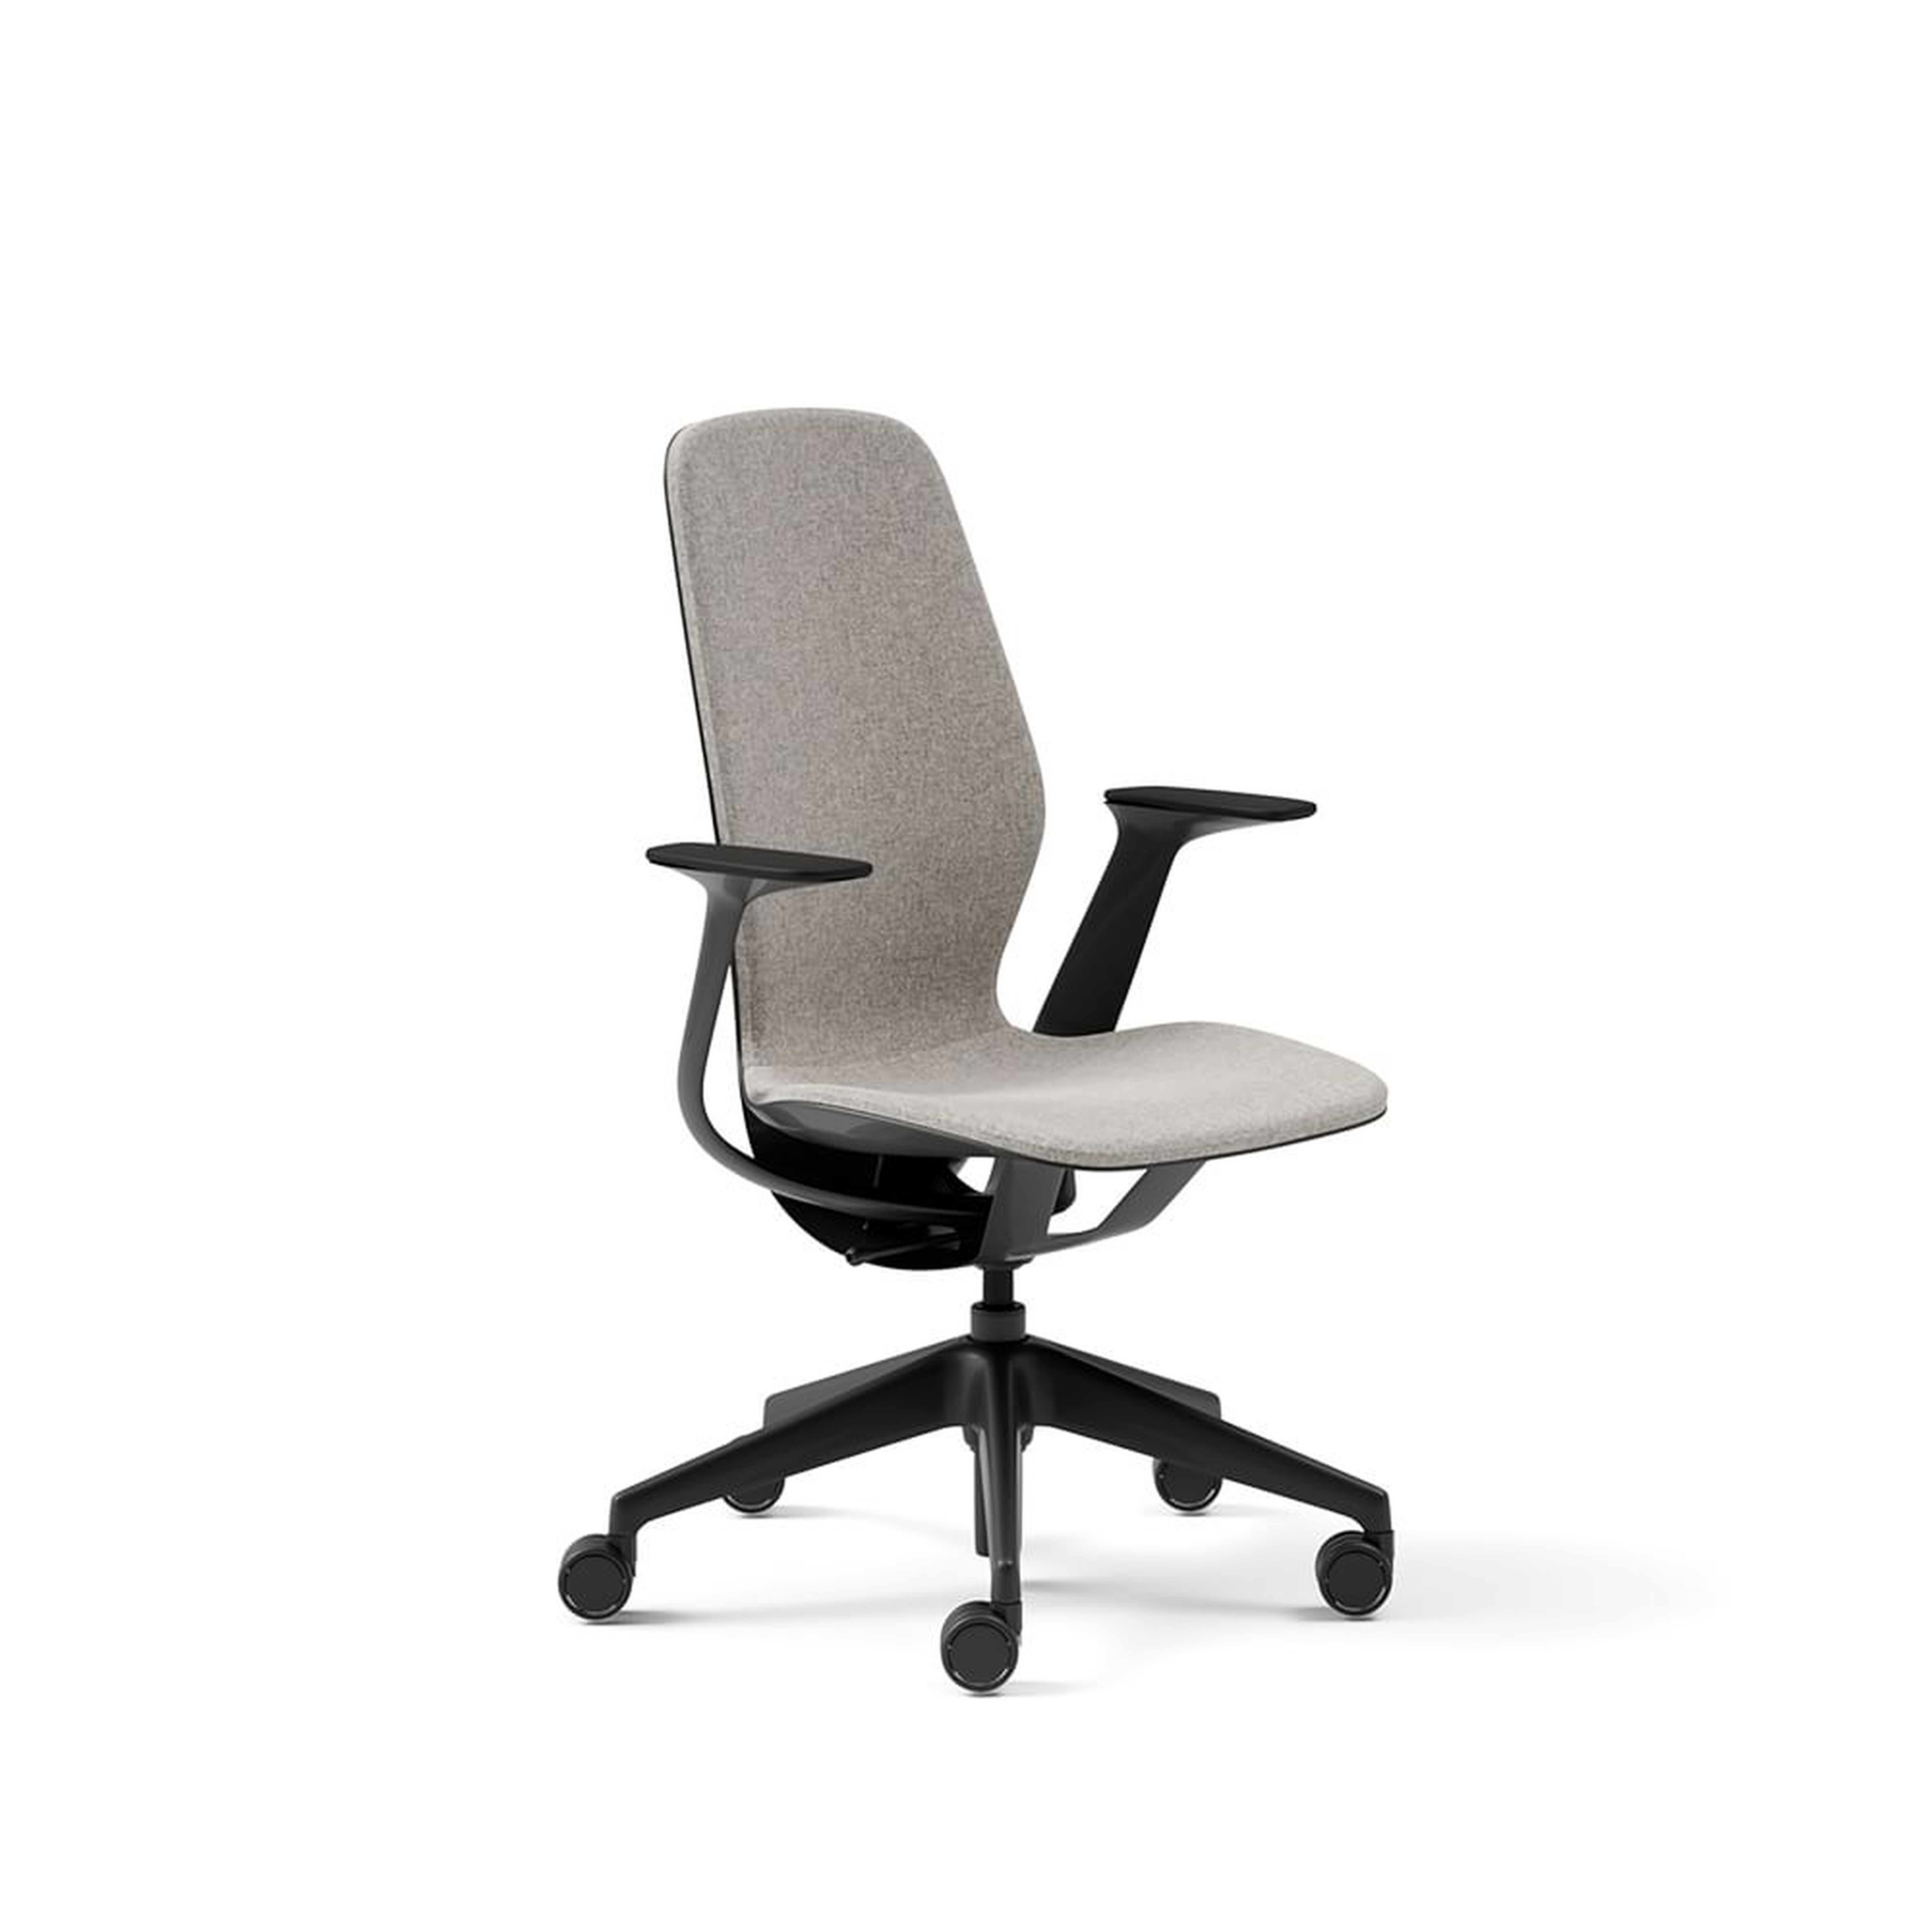 Steelcase Silq Task Chair, Soft Casters Merle / Merle Frame Medium Gray Match Back Support / Arms Match Shell - West Elm